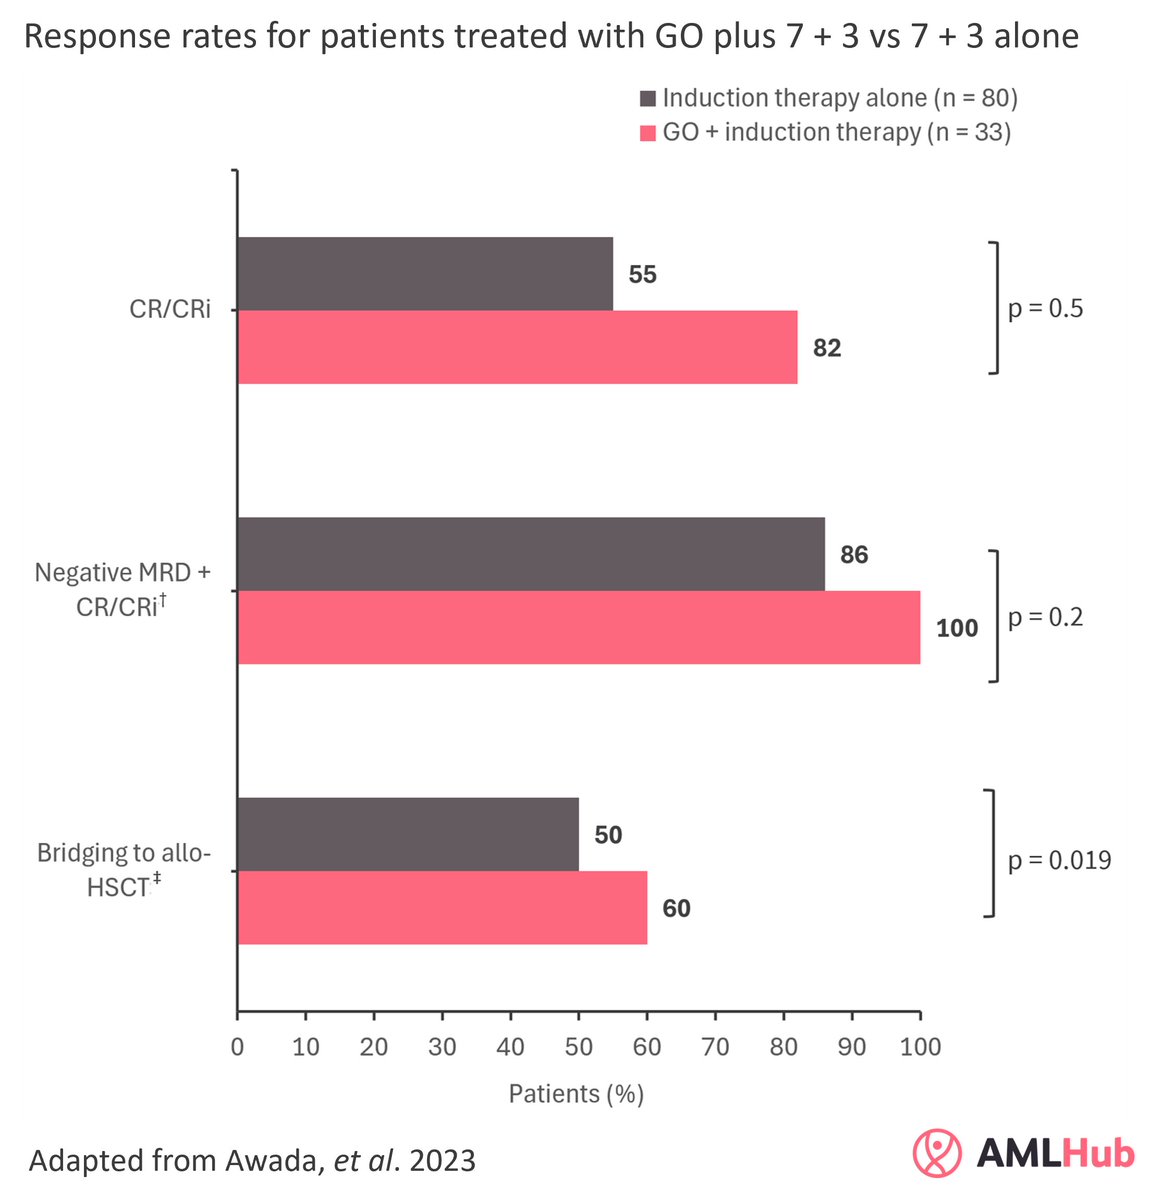 Is there a survival benefit from the addition of gemtuzumab ozogamicin to 7 + 3 induction therapy in patients with ND AML and intermediate cytogenetics? Read more here: loom.ly/FFBAmYs #AMLsm #leusm #leukemia #MedicalEducation